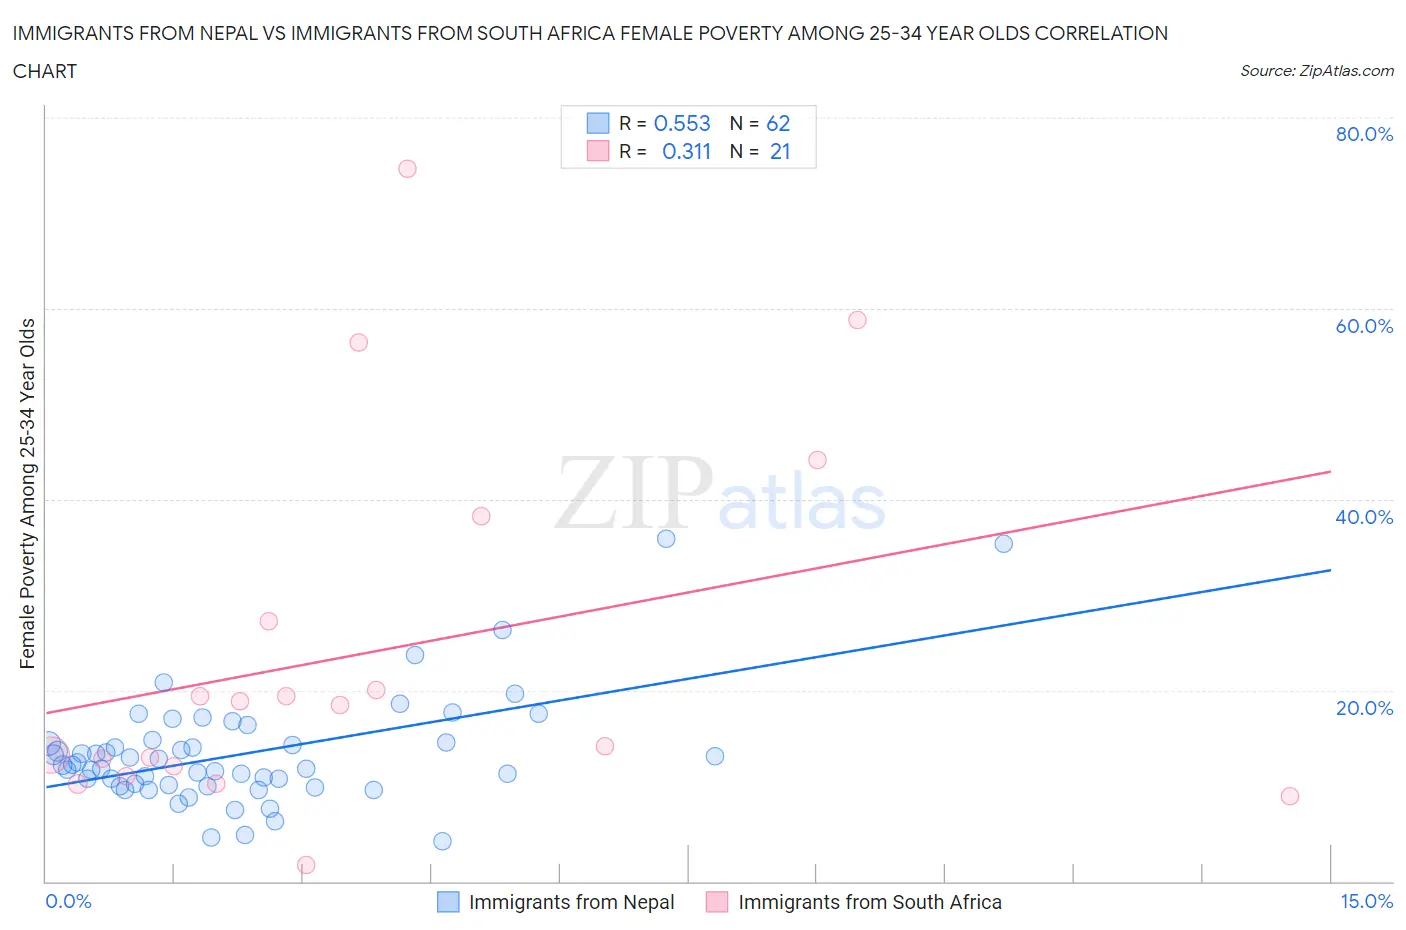 Immigrants from Nepal vs Immigrants from South Africa Female Poverty Among 25-34 Year Olds